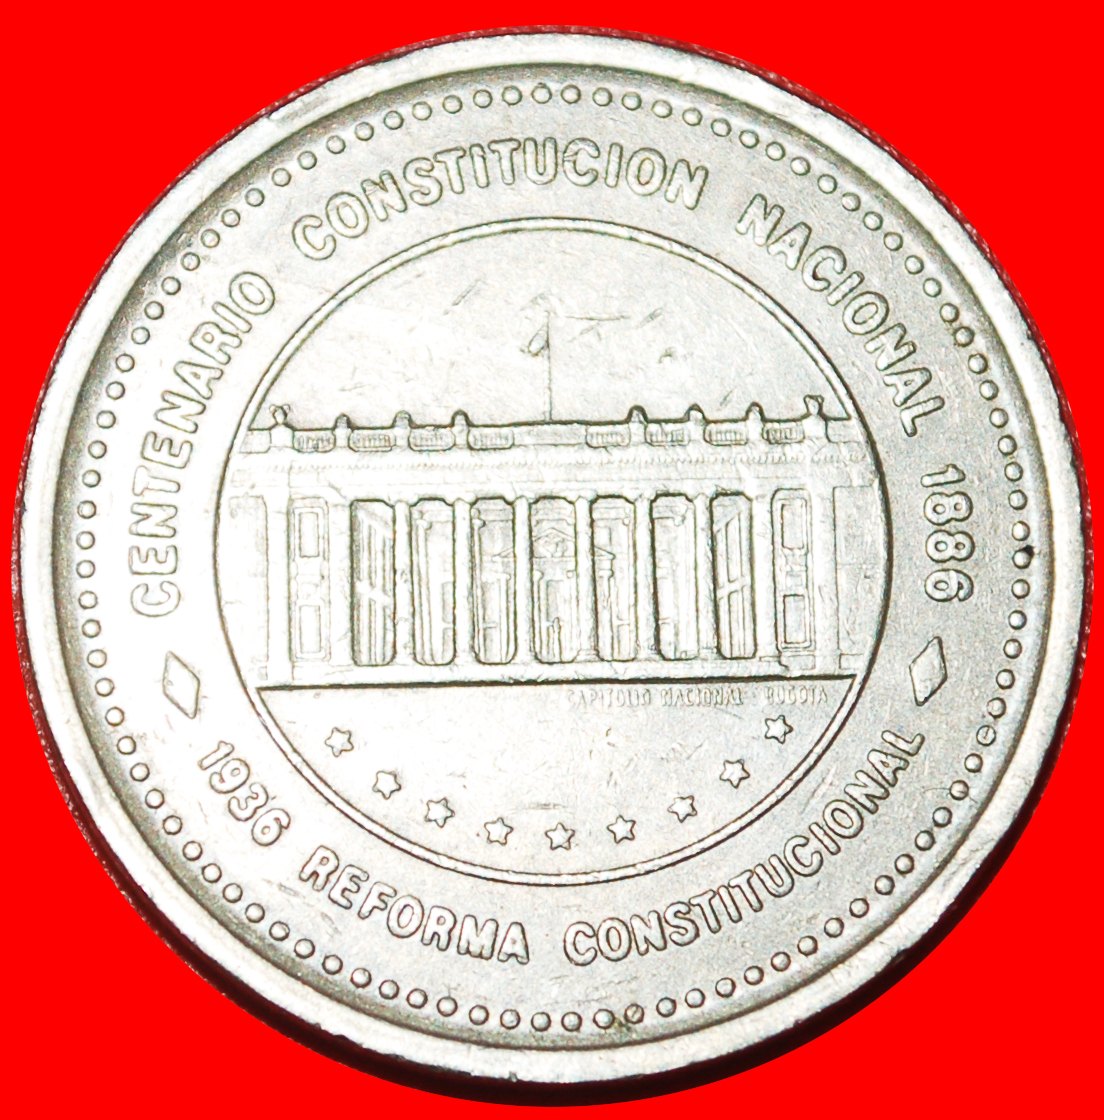  * CONSTITUTION 1886 1936 (1986-1989): COLOMBIA ★ 50 PESOS 1987! LOW START ★ NO RESERVE!   